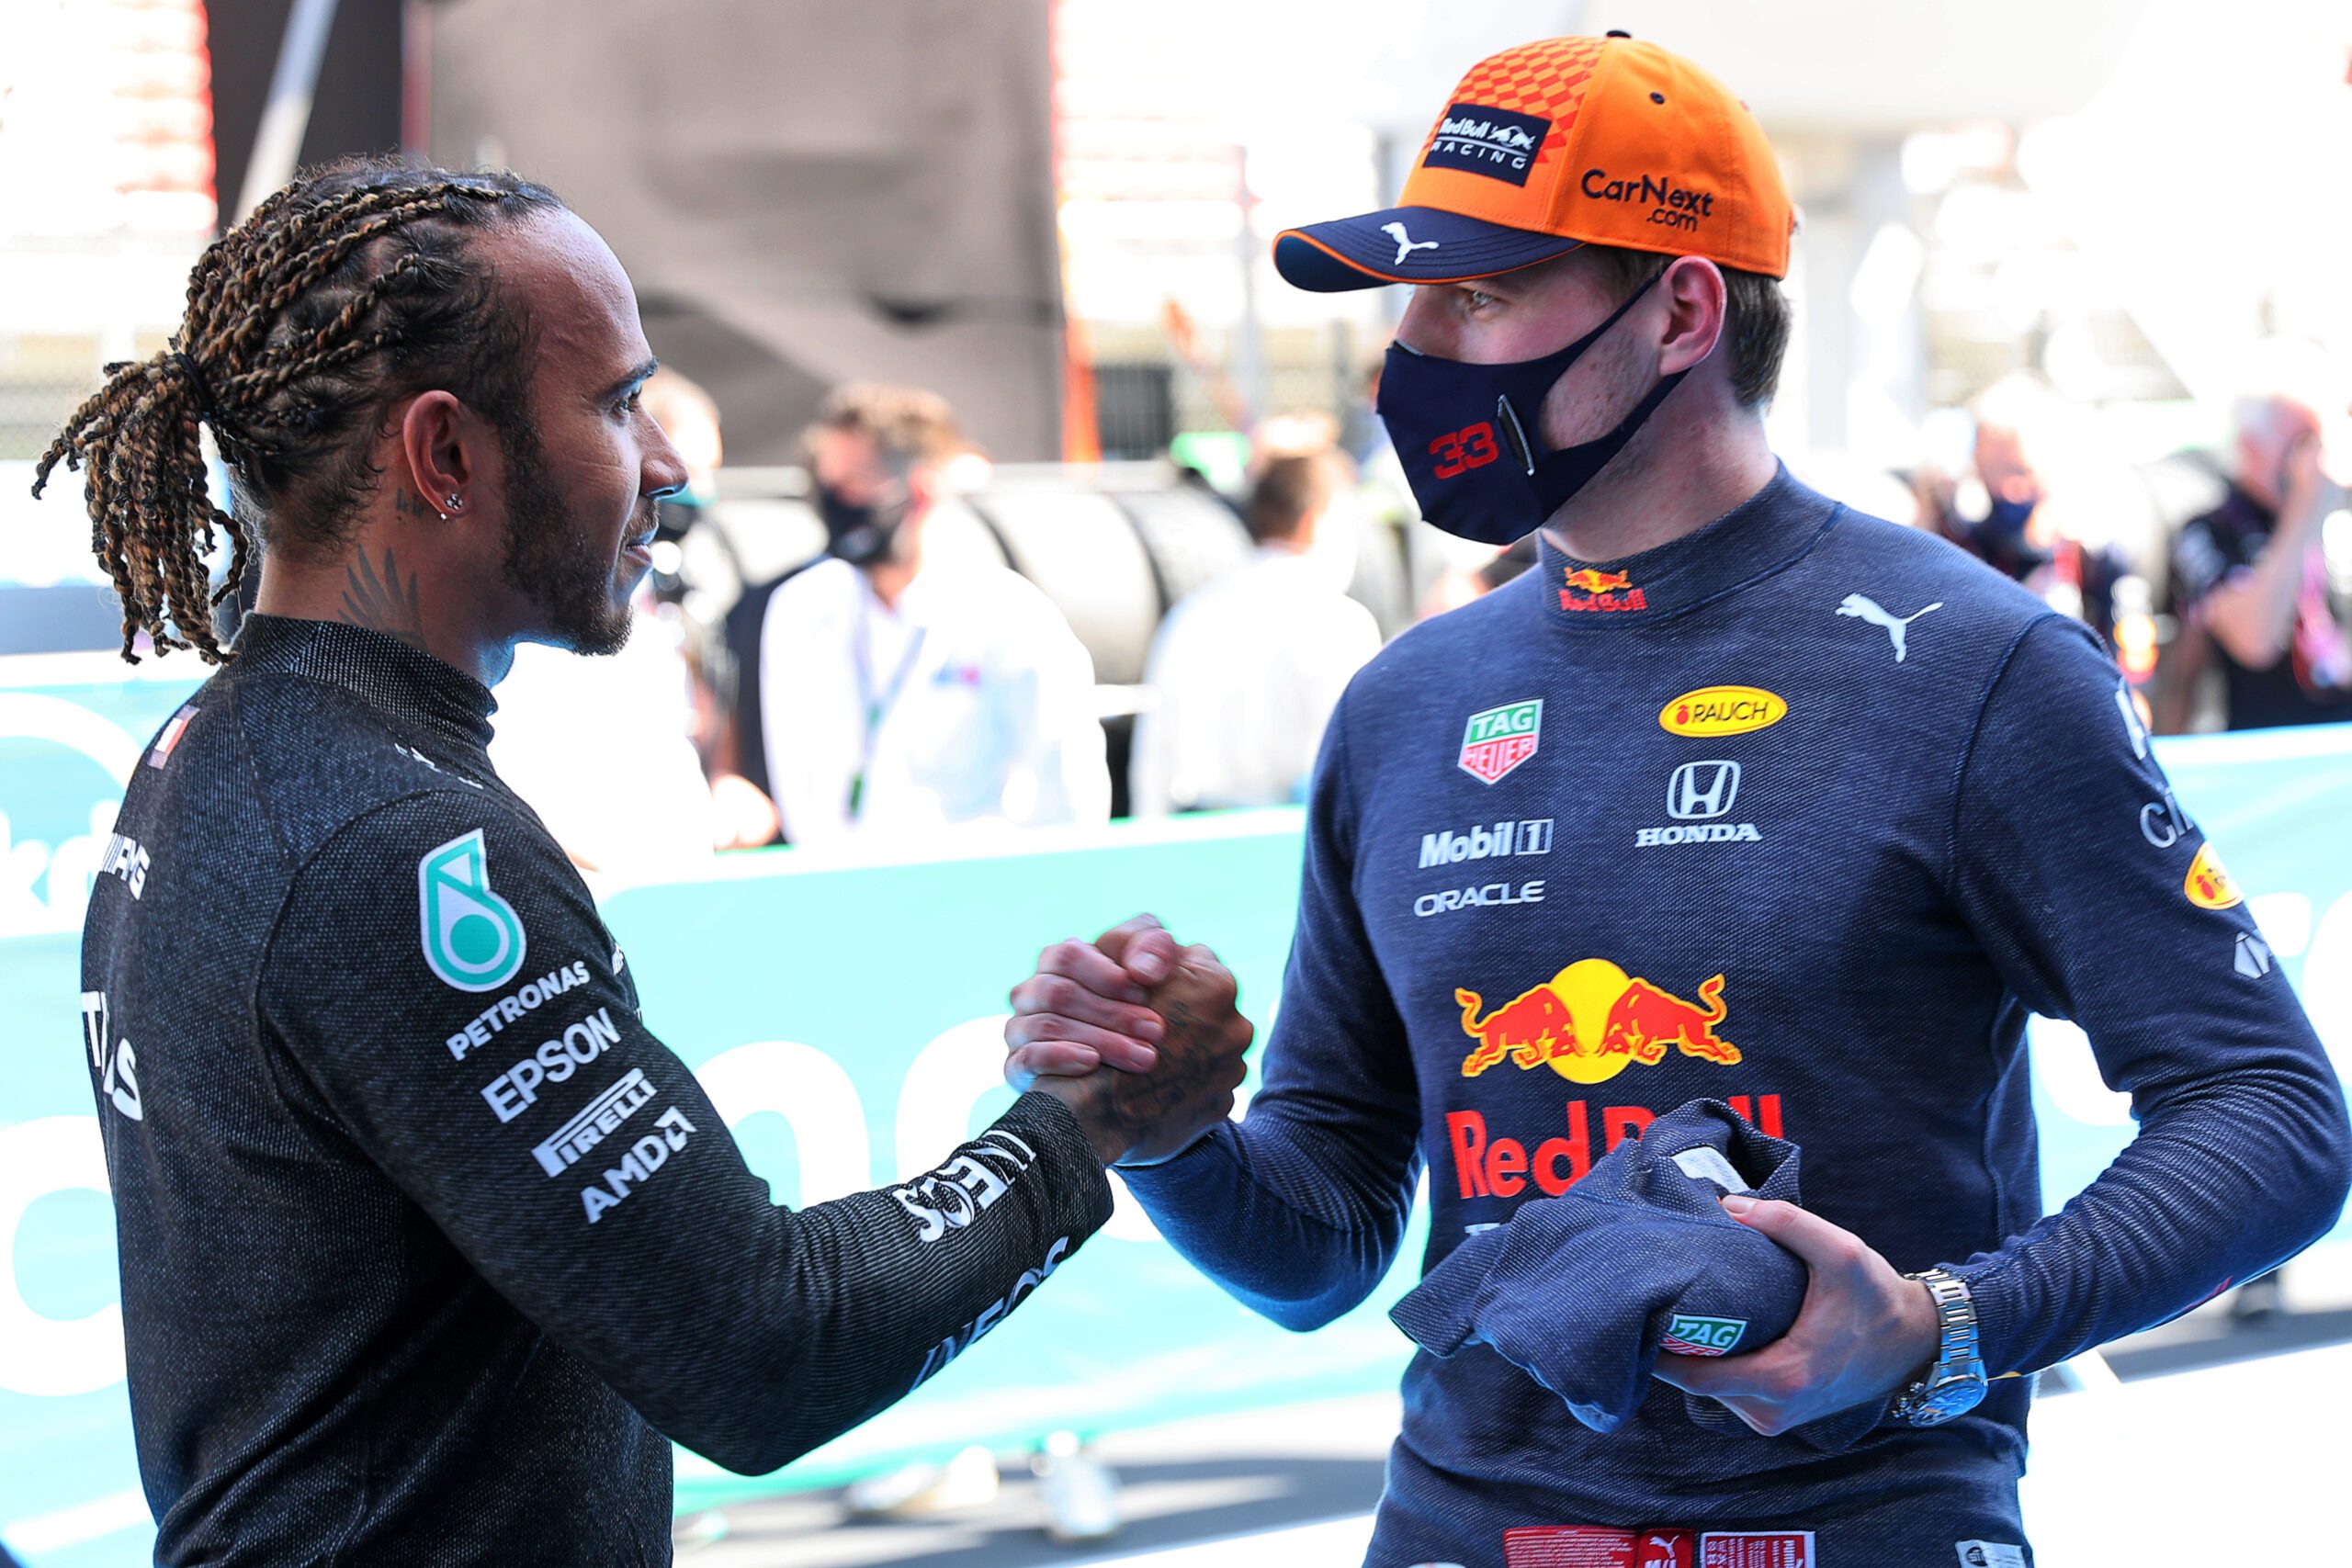 BARCELONA,SPAIN,08.MAY.21 - MOTORSPORTS, FORMULA 1 - Grand Prix of Spain, Circuit de Barcelona Catalunya, practice and qualifying. Image shows Lewis Hamilton (GBR/ Mercedes) and Max Verstappen (NED/ Red Bull Racing).